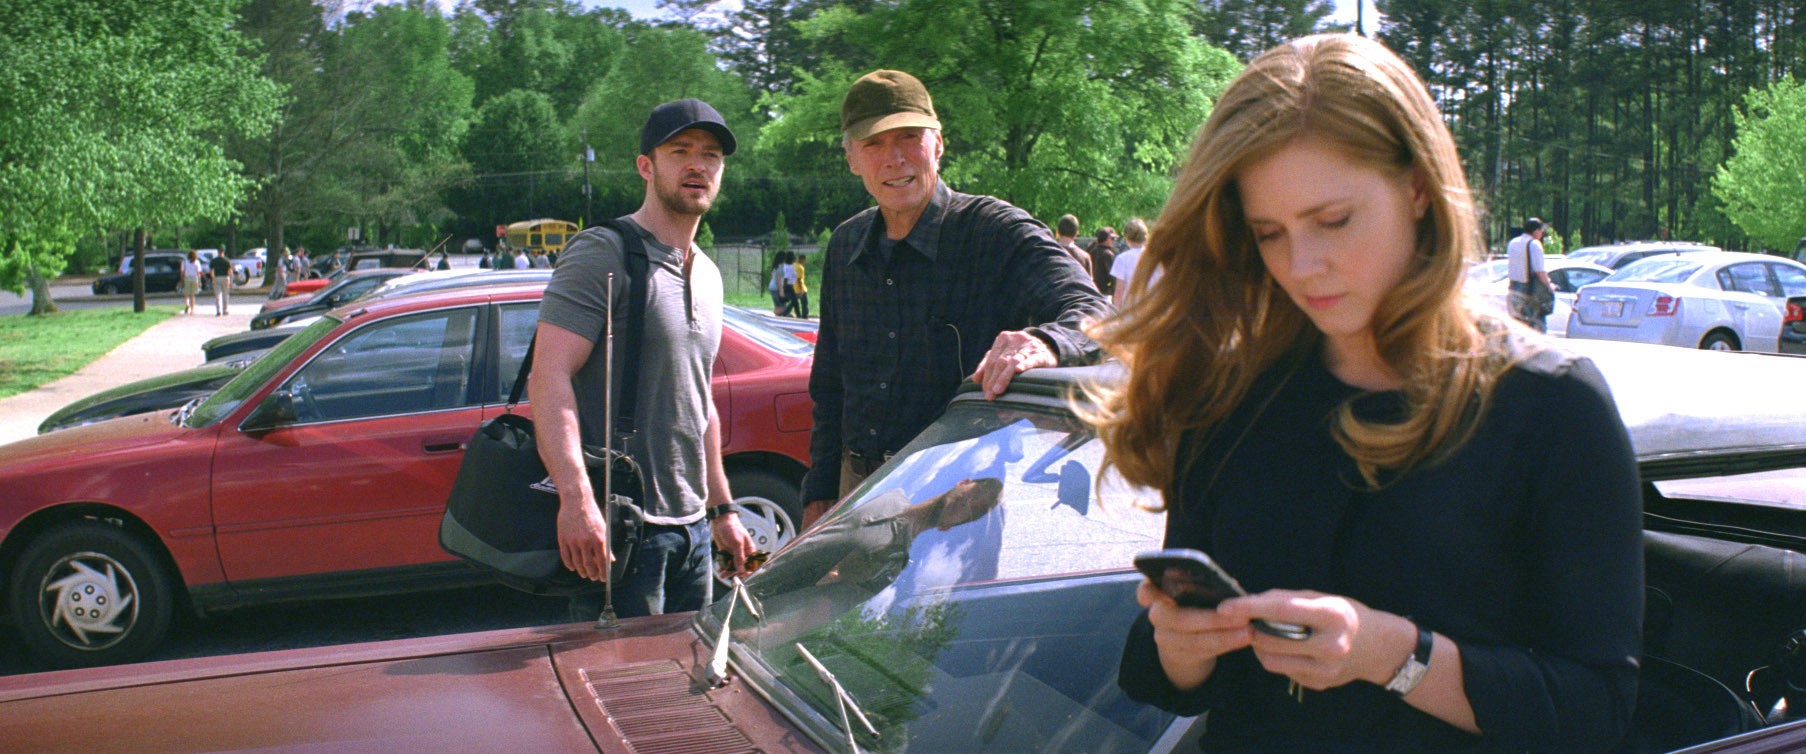 Justin Timberlake, Clint Eastwood and Amy Adams in Warner Bros. Pictures' Trouble with the Curve (2012)